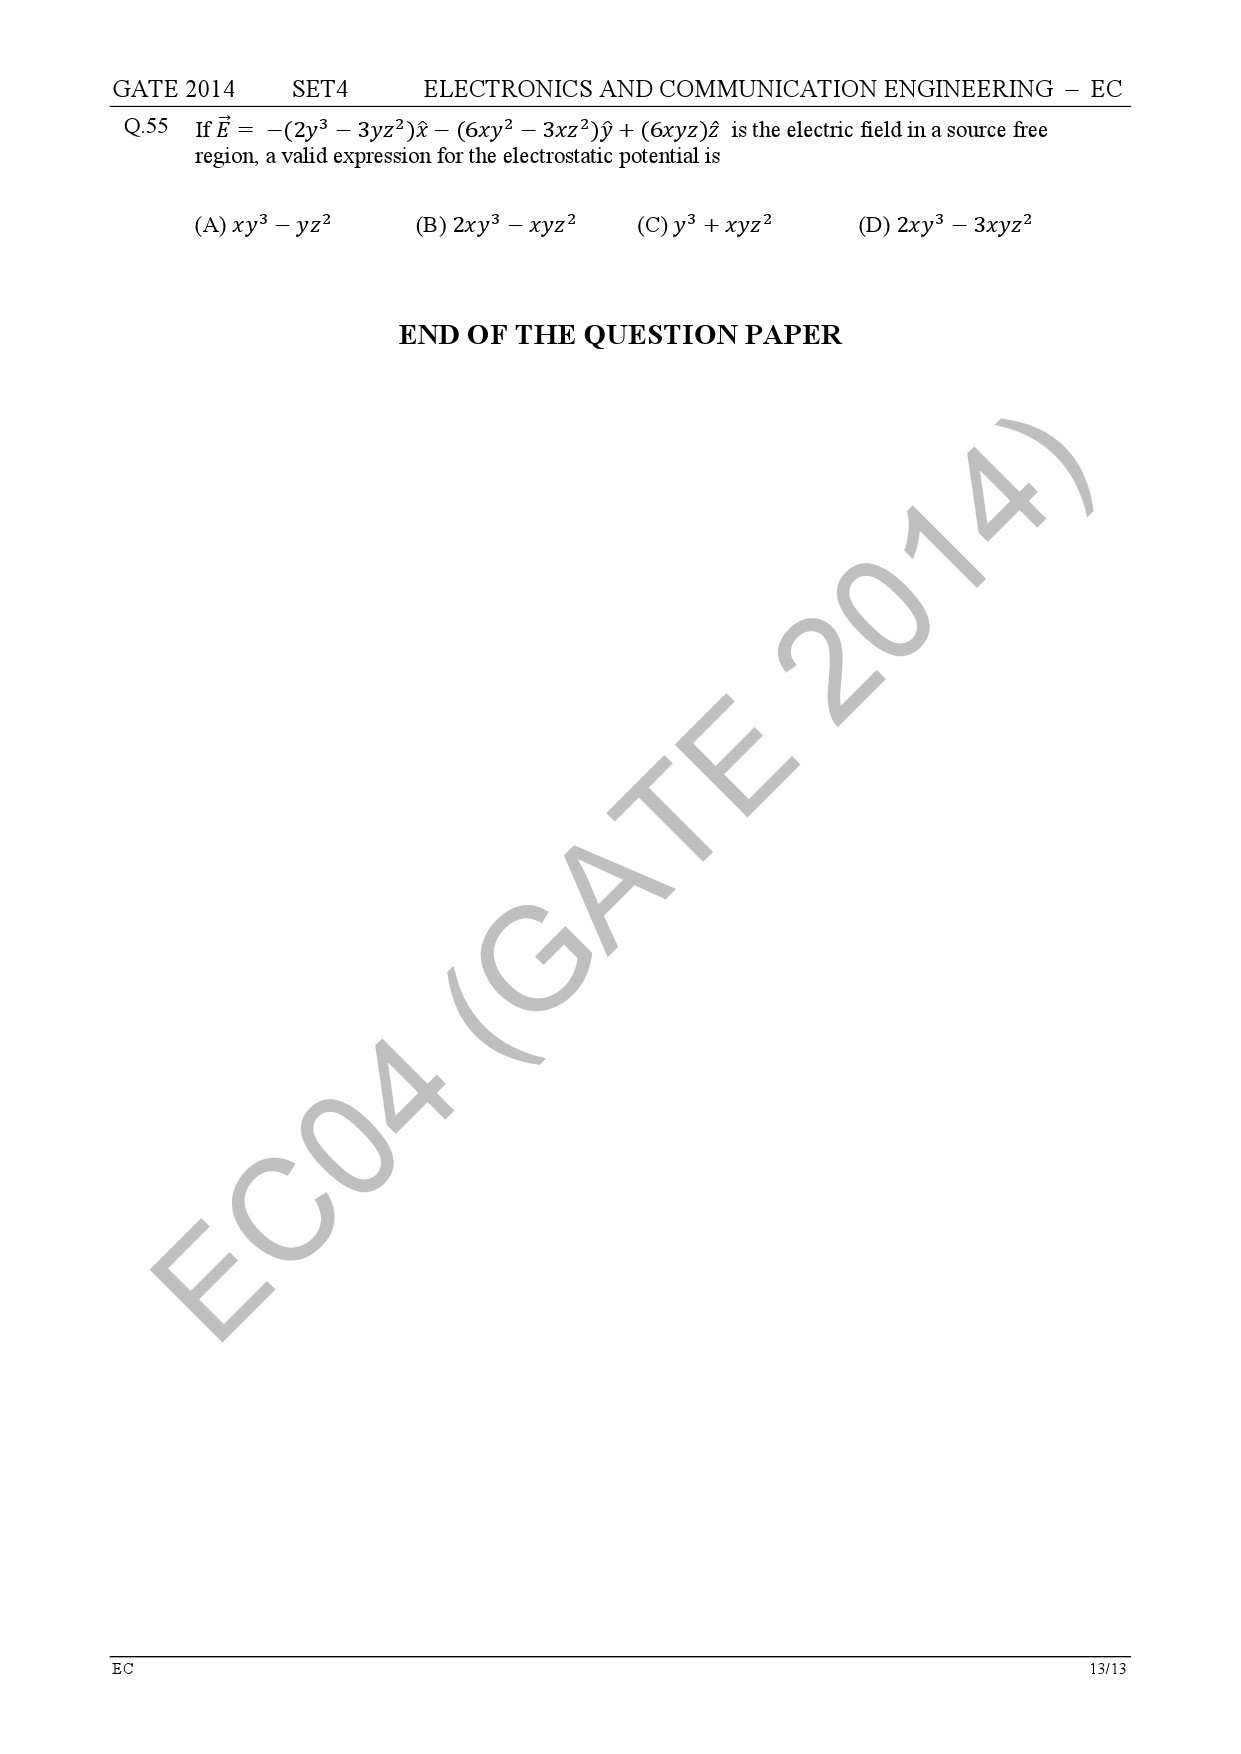 GATE Exam Question Paper 2014 Electronics and Communication Engineering Set 4 19